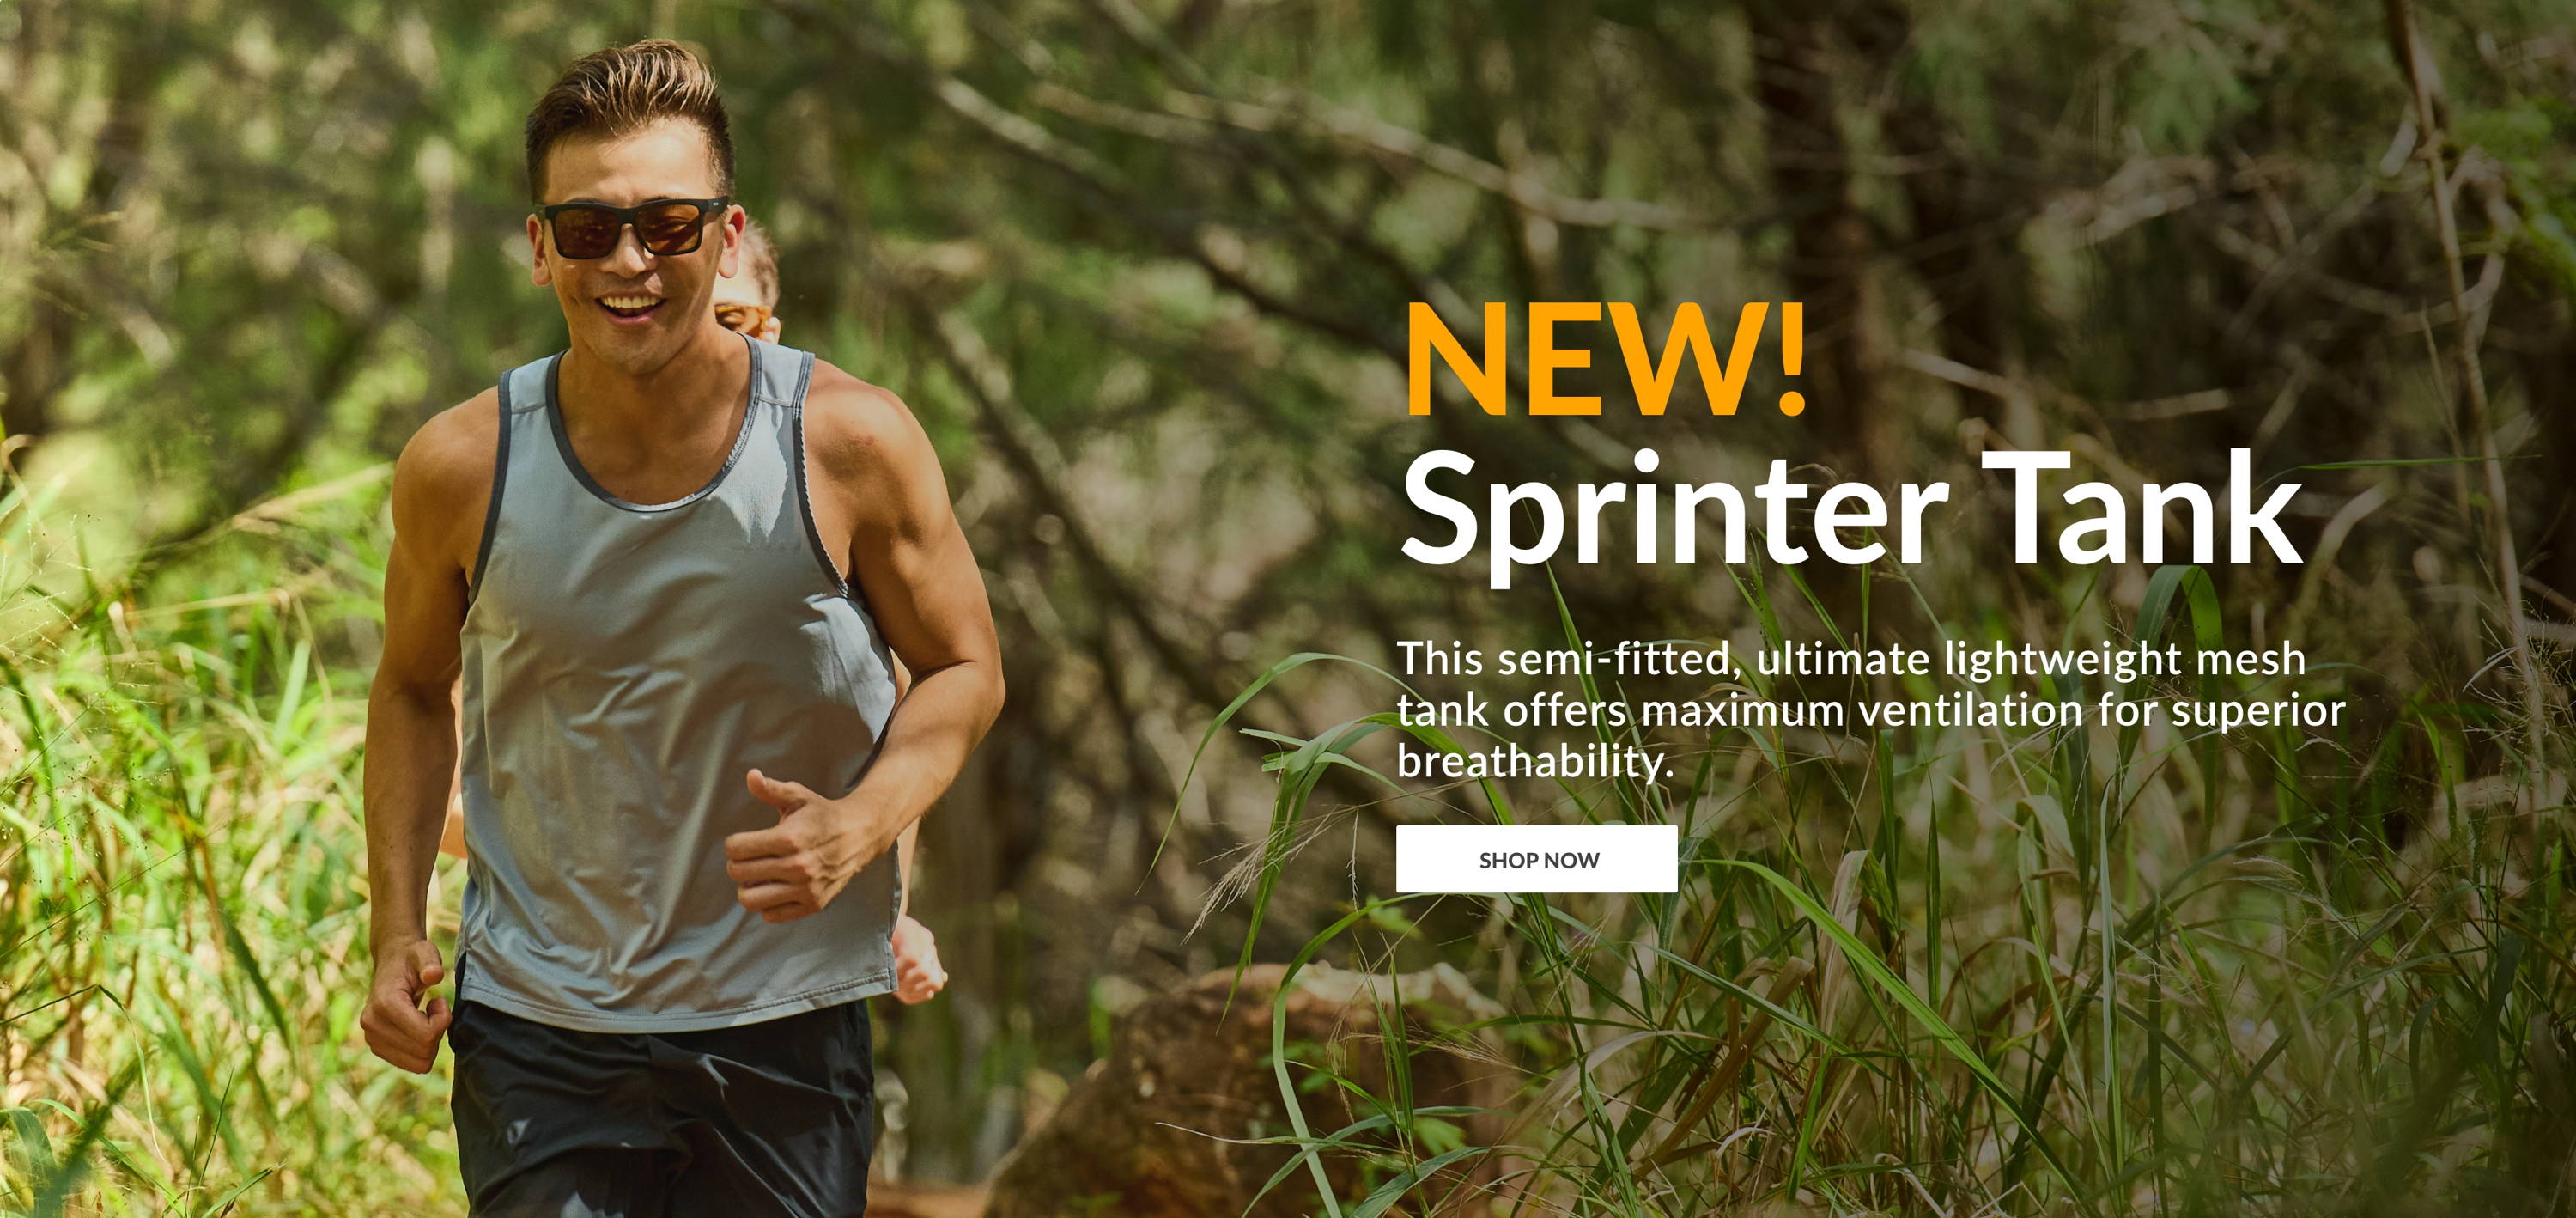 NEW! Sprinter Tank. This semi-fitted, ultimate lightweight mesh tank offers maximum ventilation for superior breathability. SHOP NOW